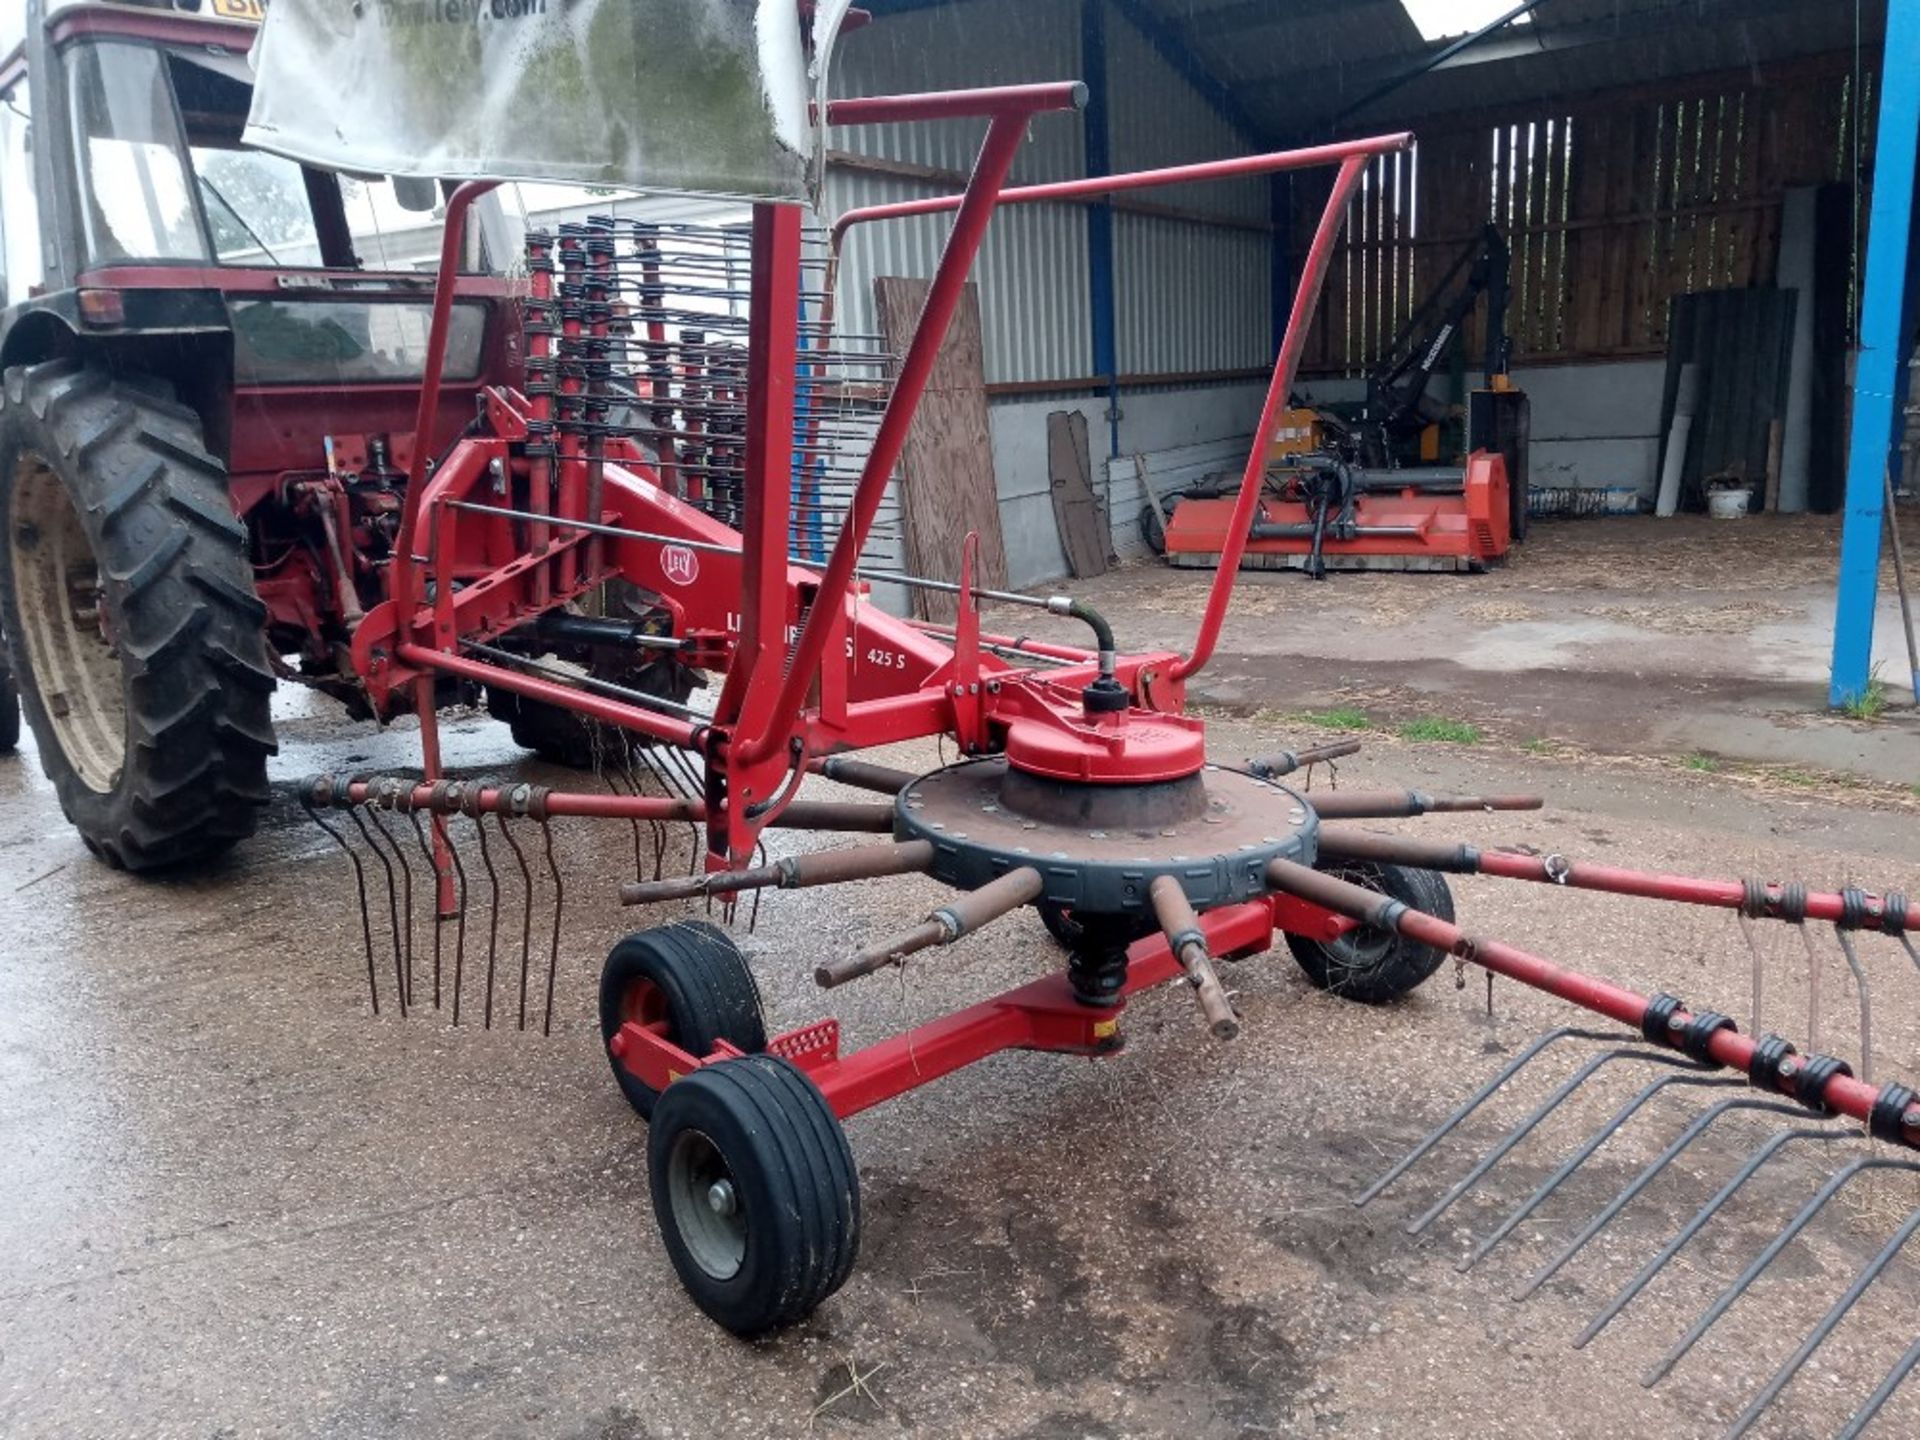 Lely Hibiscus single rota rake. Circ 2009 - 2012 . Working order with no major faults. - Image 4 of 4